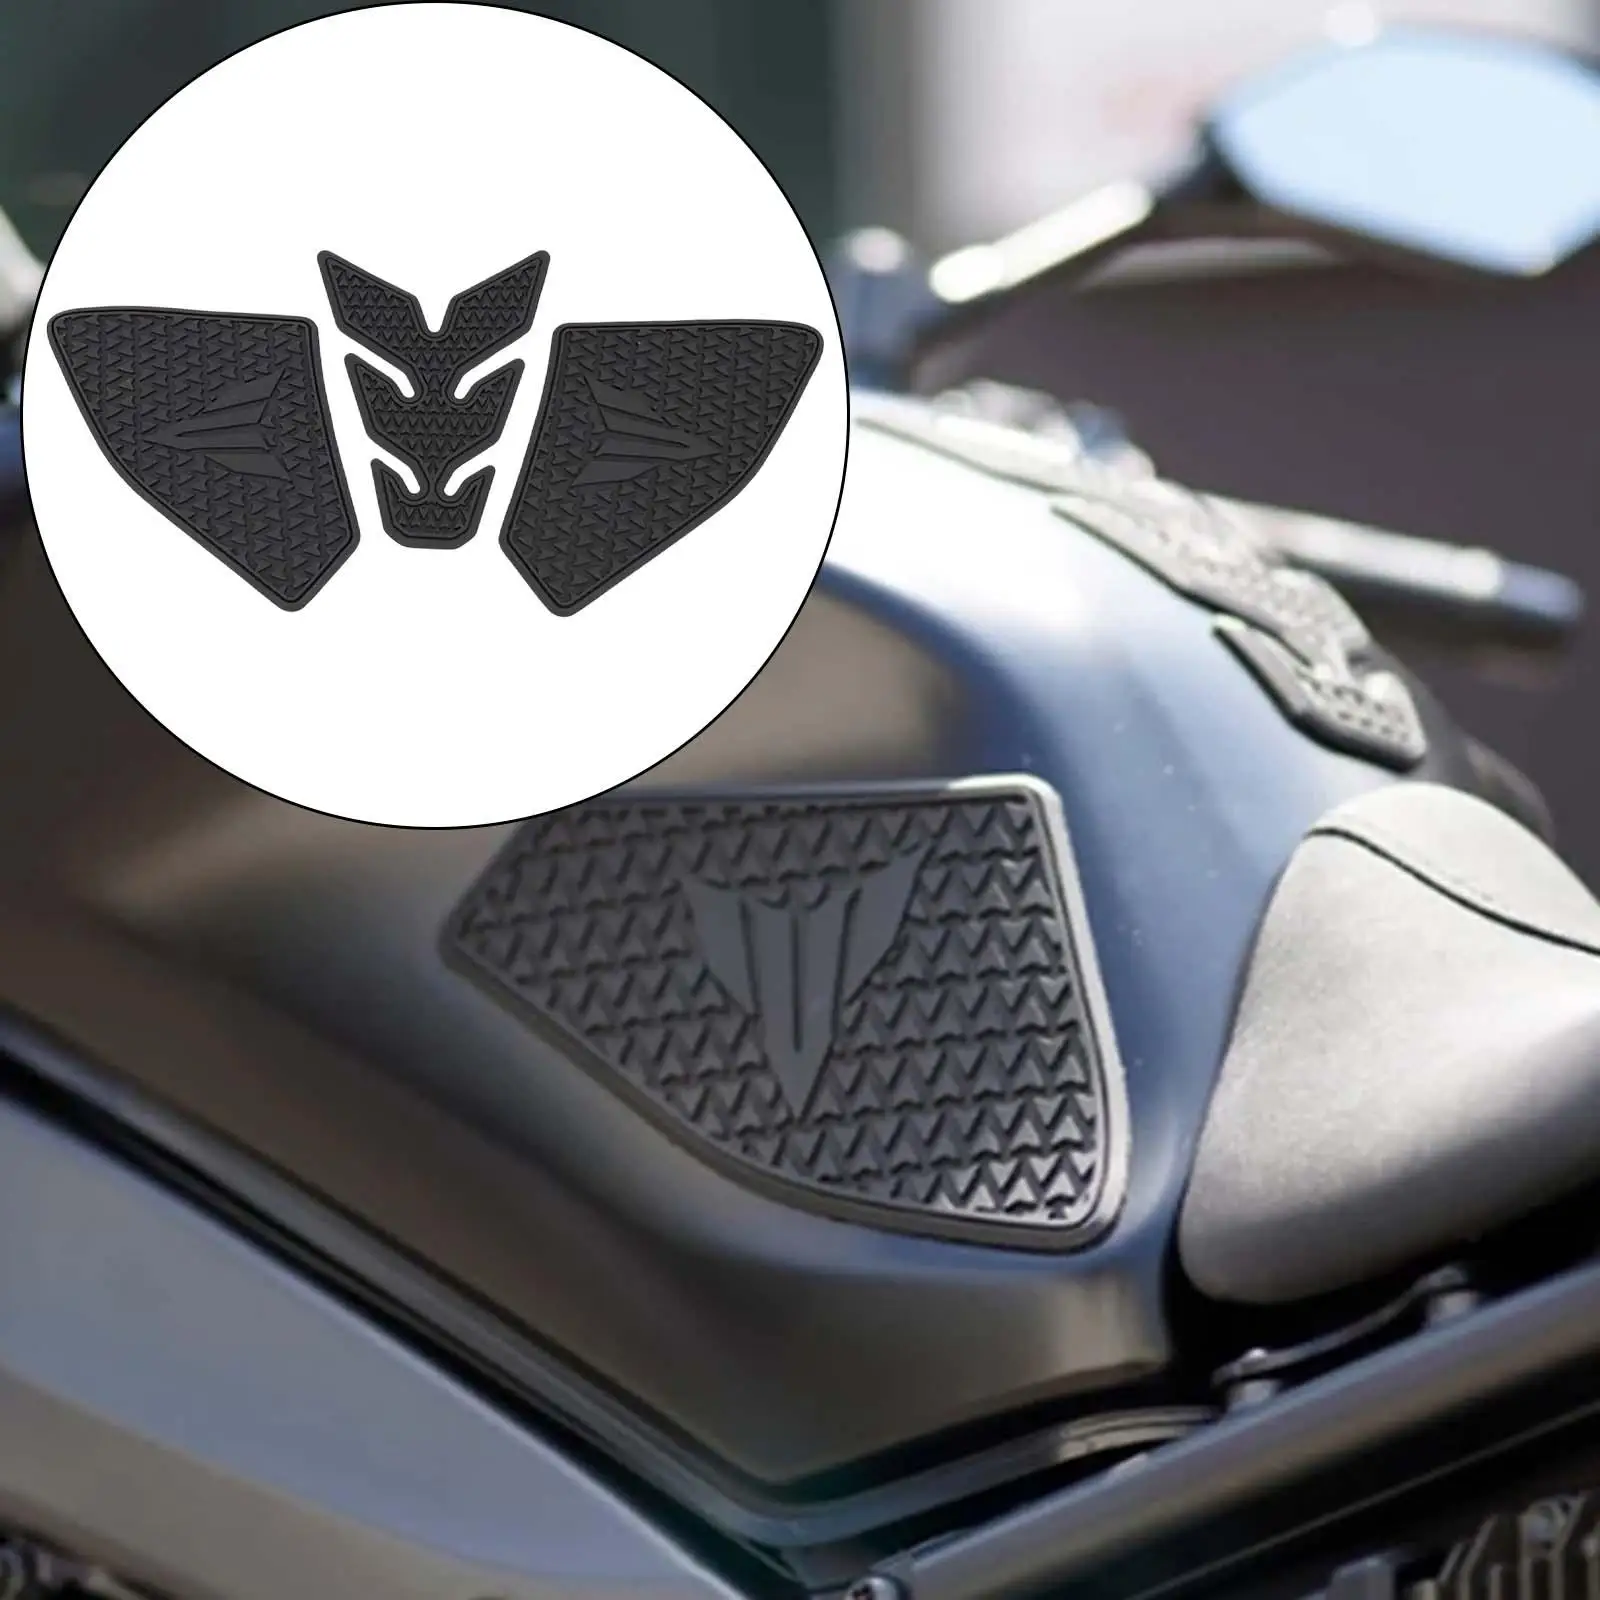 Motorcycle Gas Tank Pads Wear Resistant Parts Supply for 2021